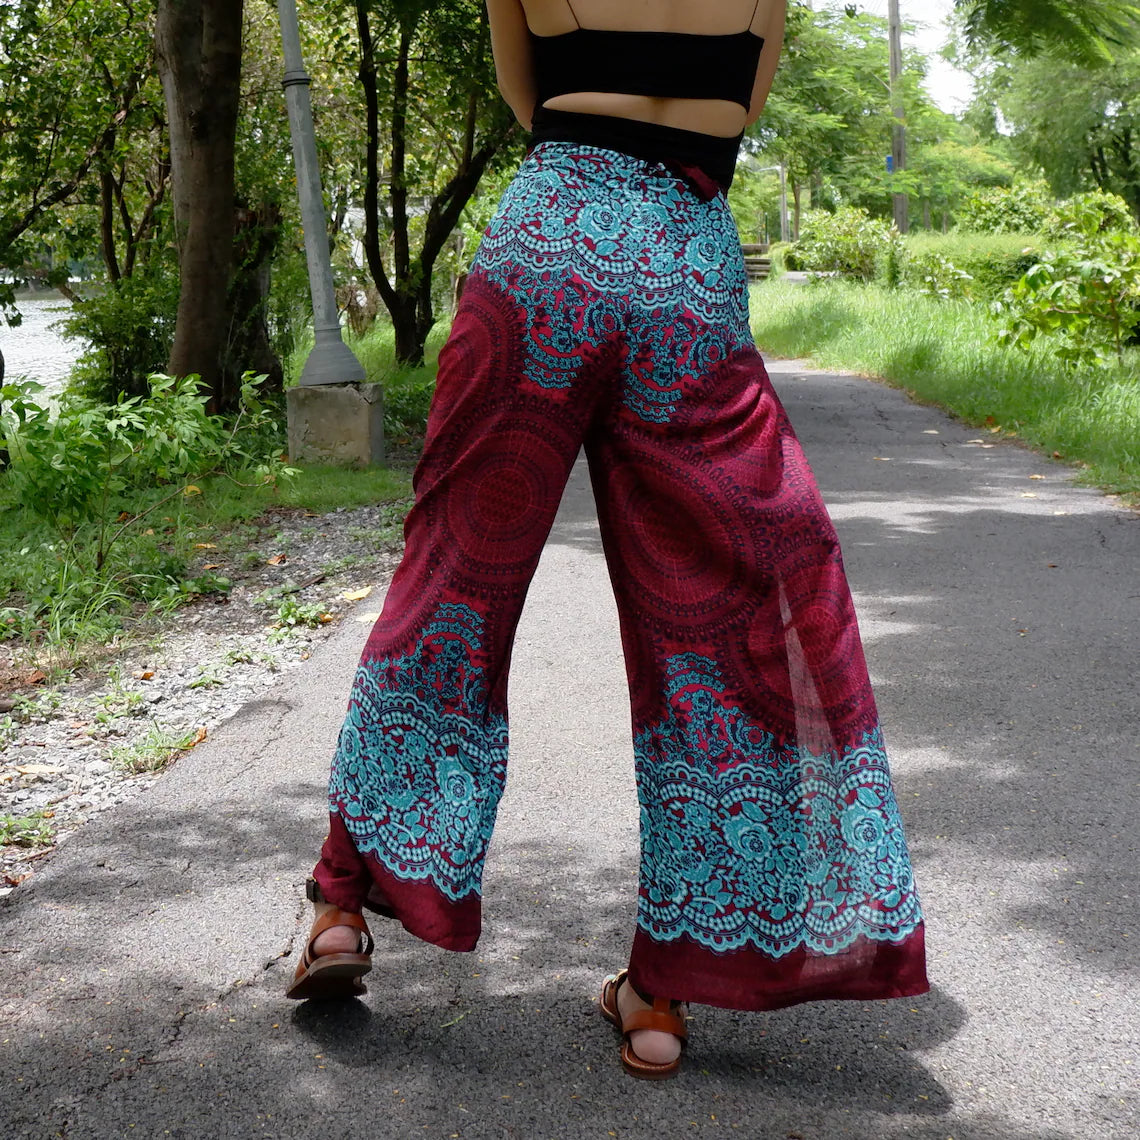 Chic boho-style beach wrap pants with red-turquoise ethnic pattern and brown sandals on a scenic outdoor path.